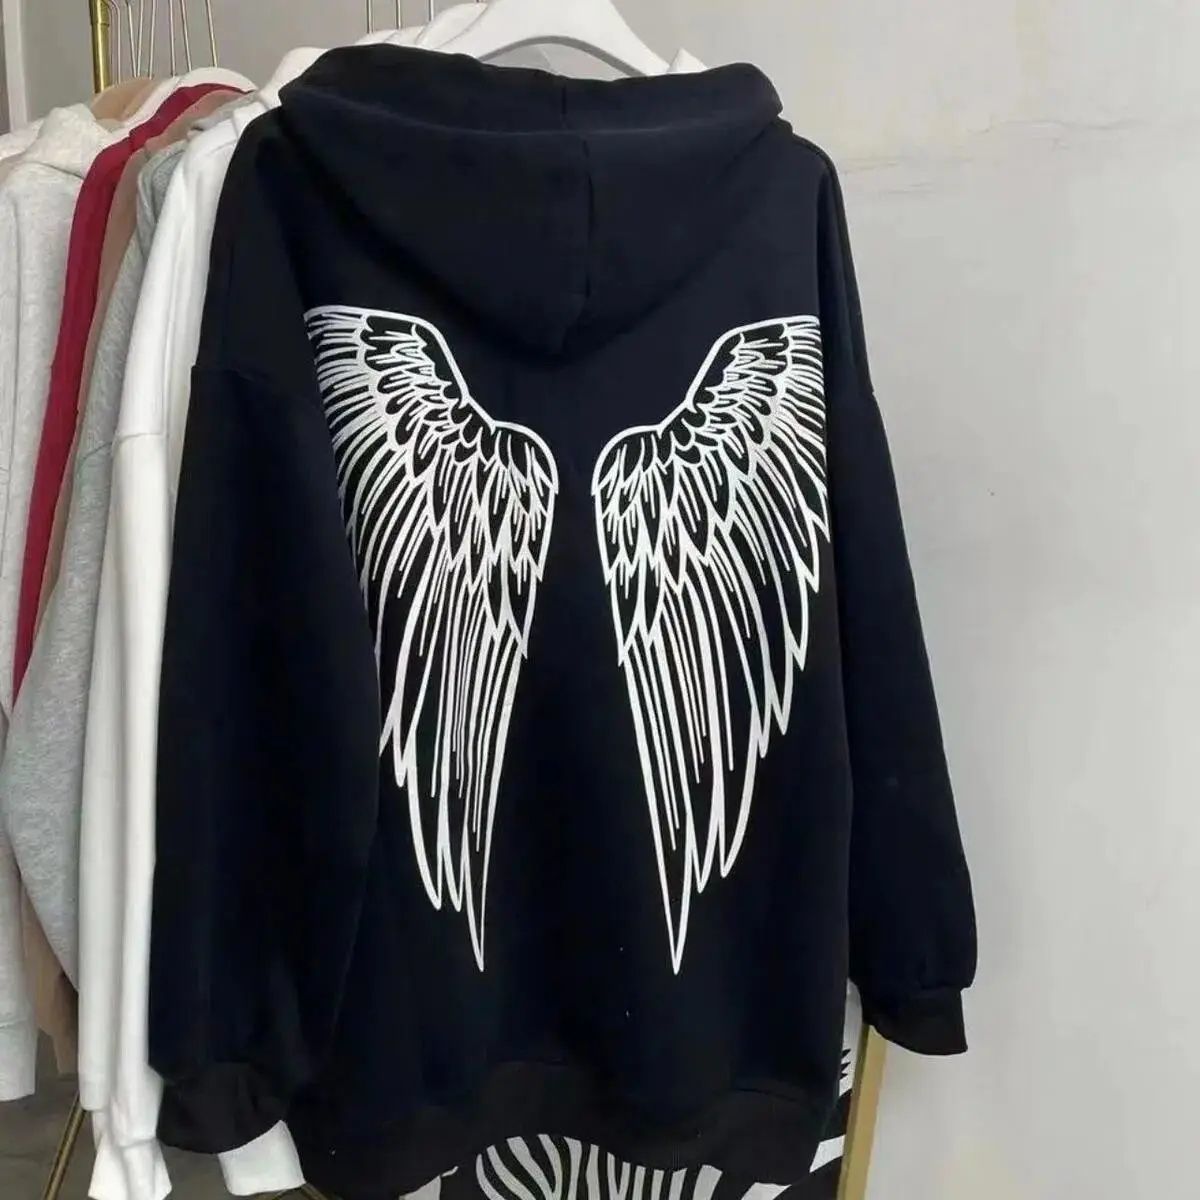 Middle and big children's angel wings printing American retro hooded sweater women's college style loose casual couple student girl